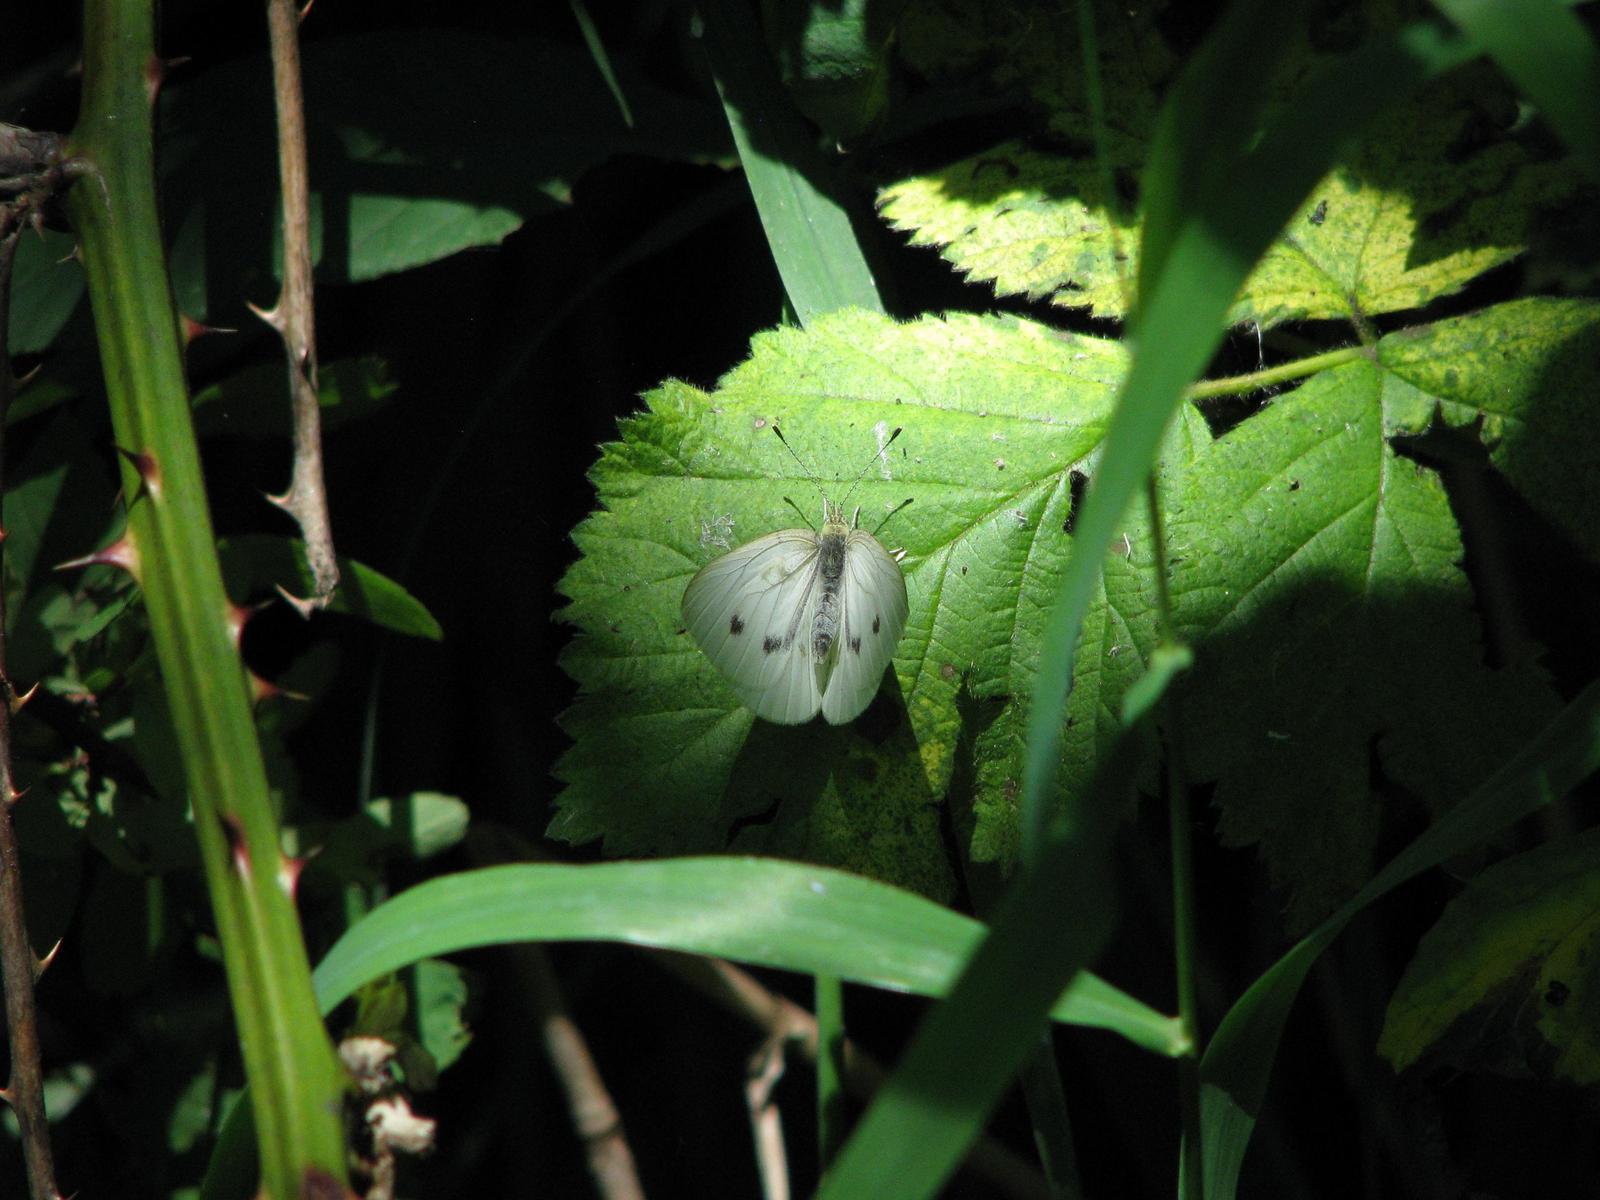 Cabbage White Photo by Ted Goshulak